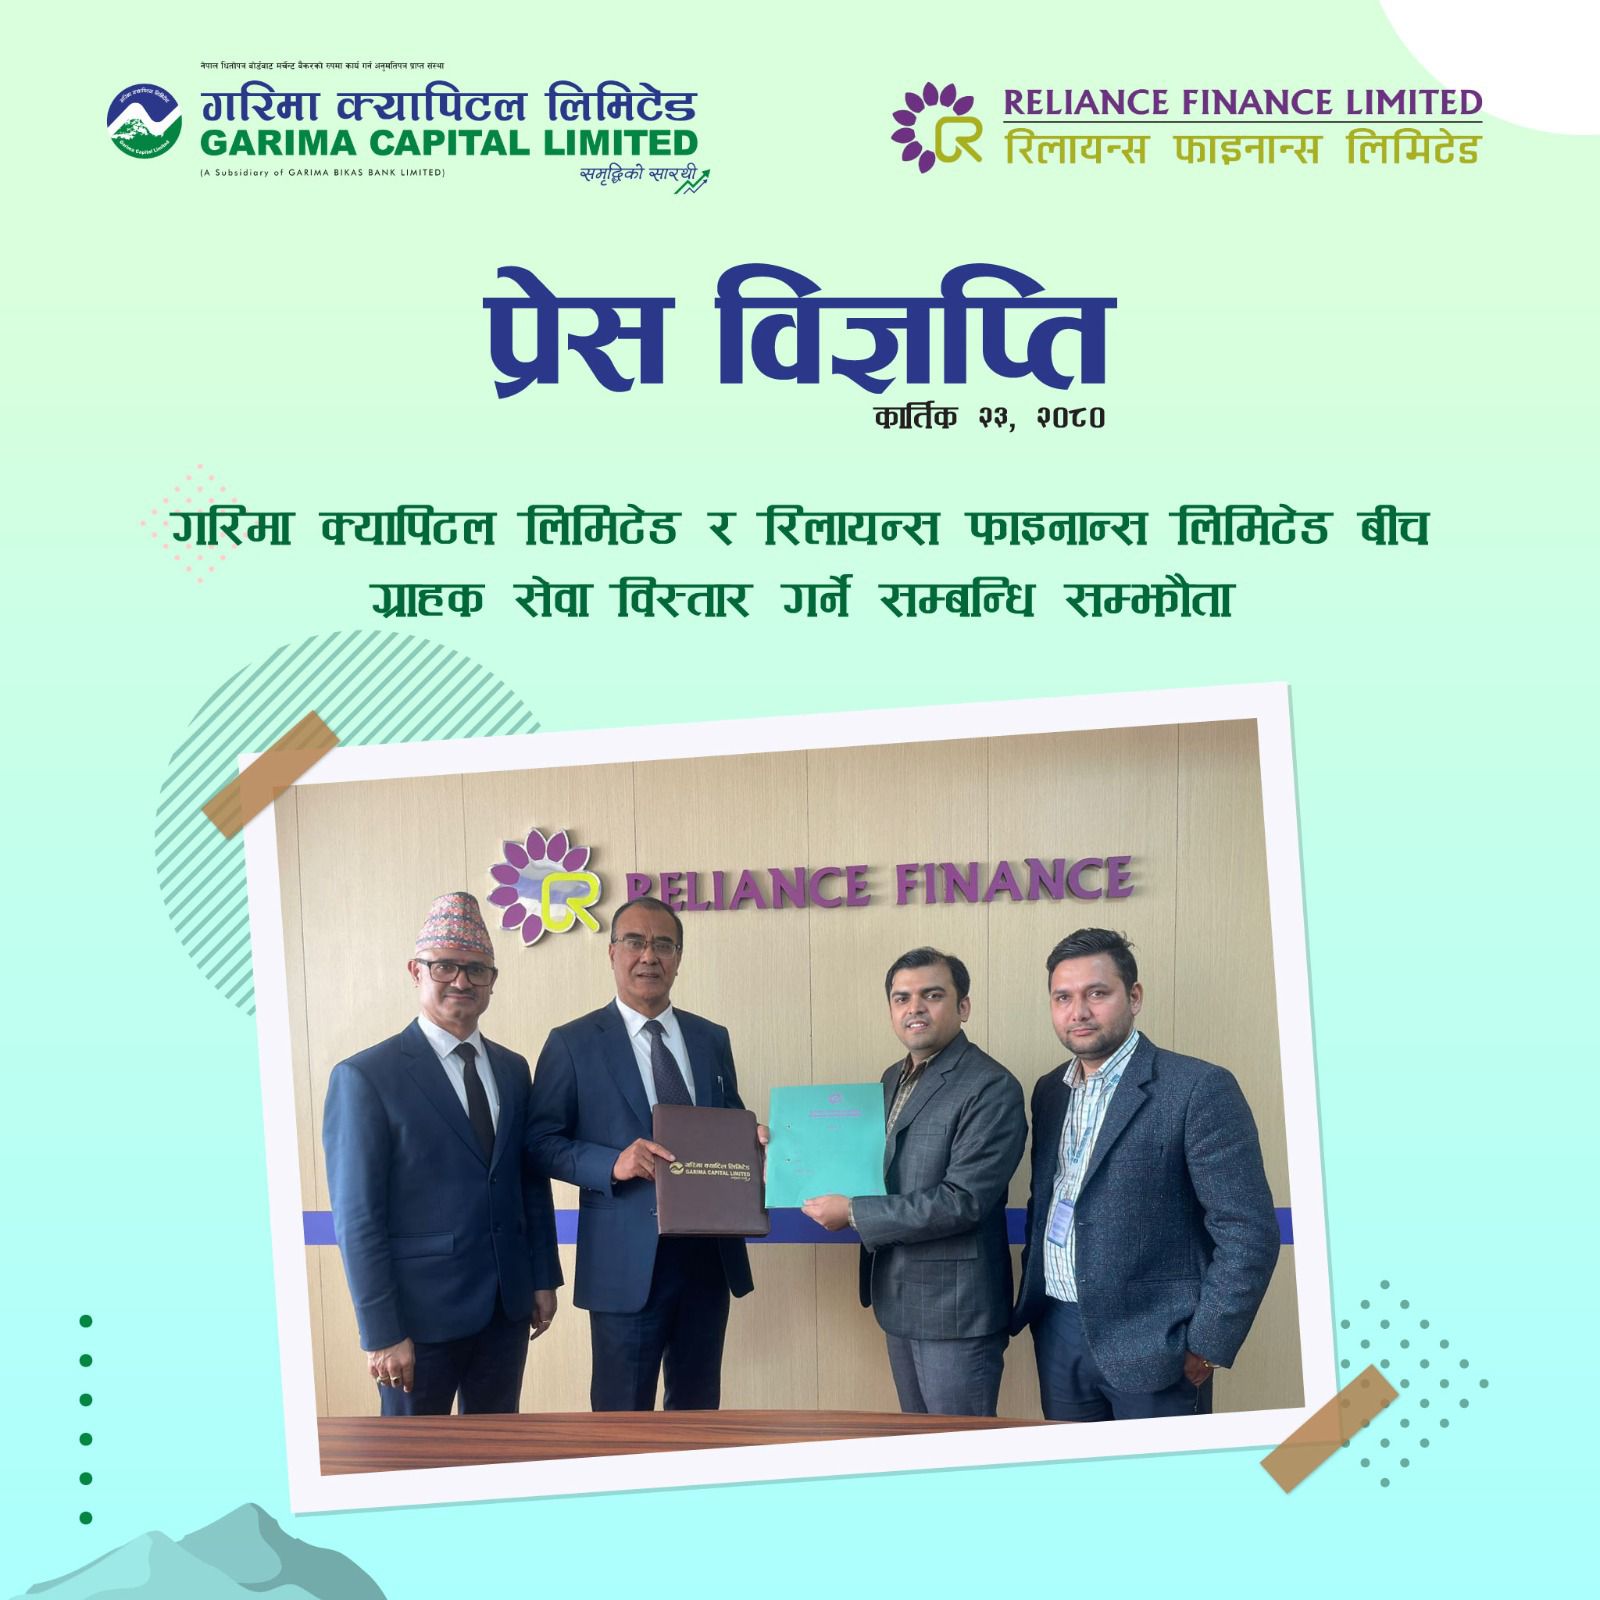 Agreement between Garima Capital Limited and Reliance Finance Limited to extend customer service